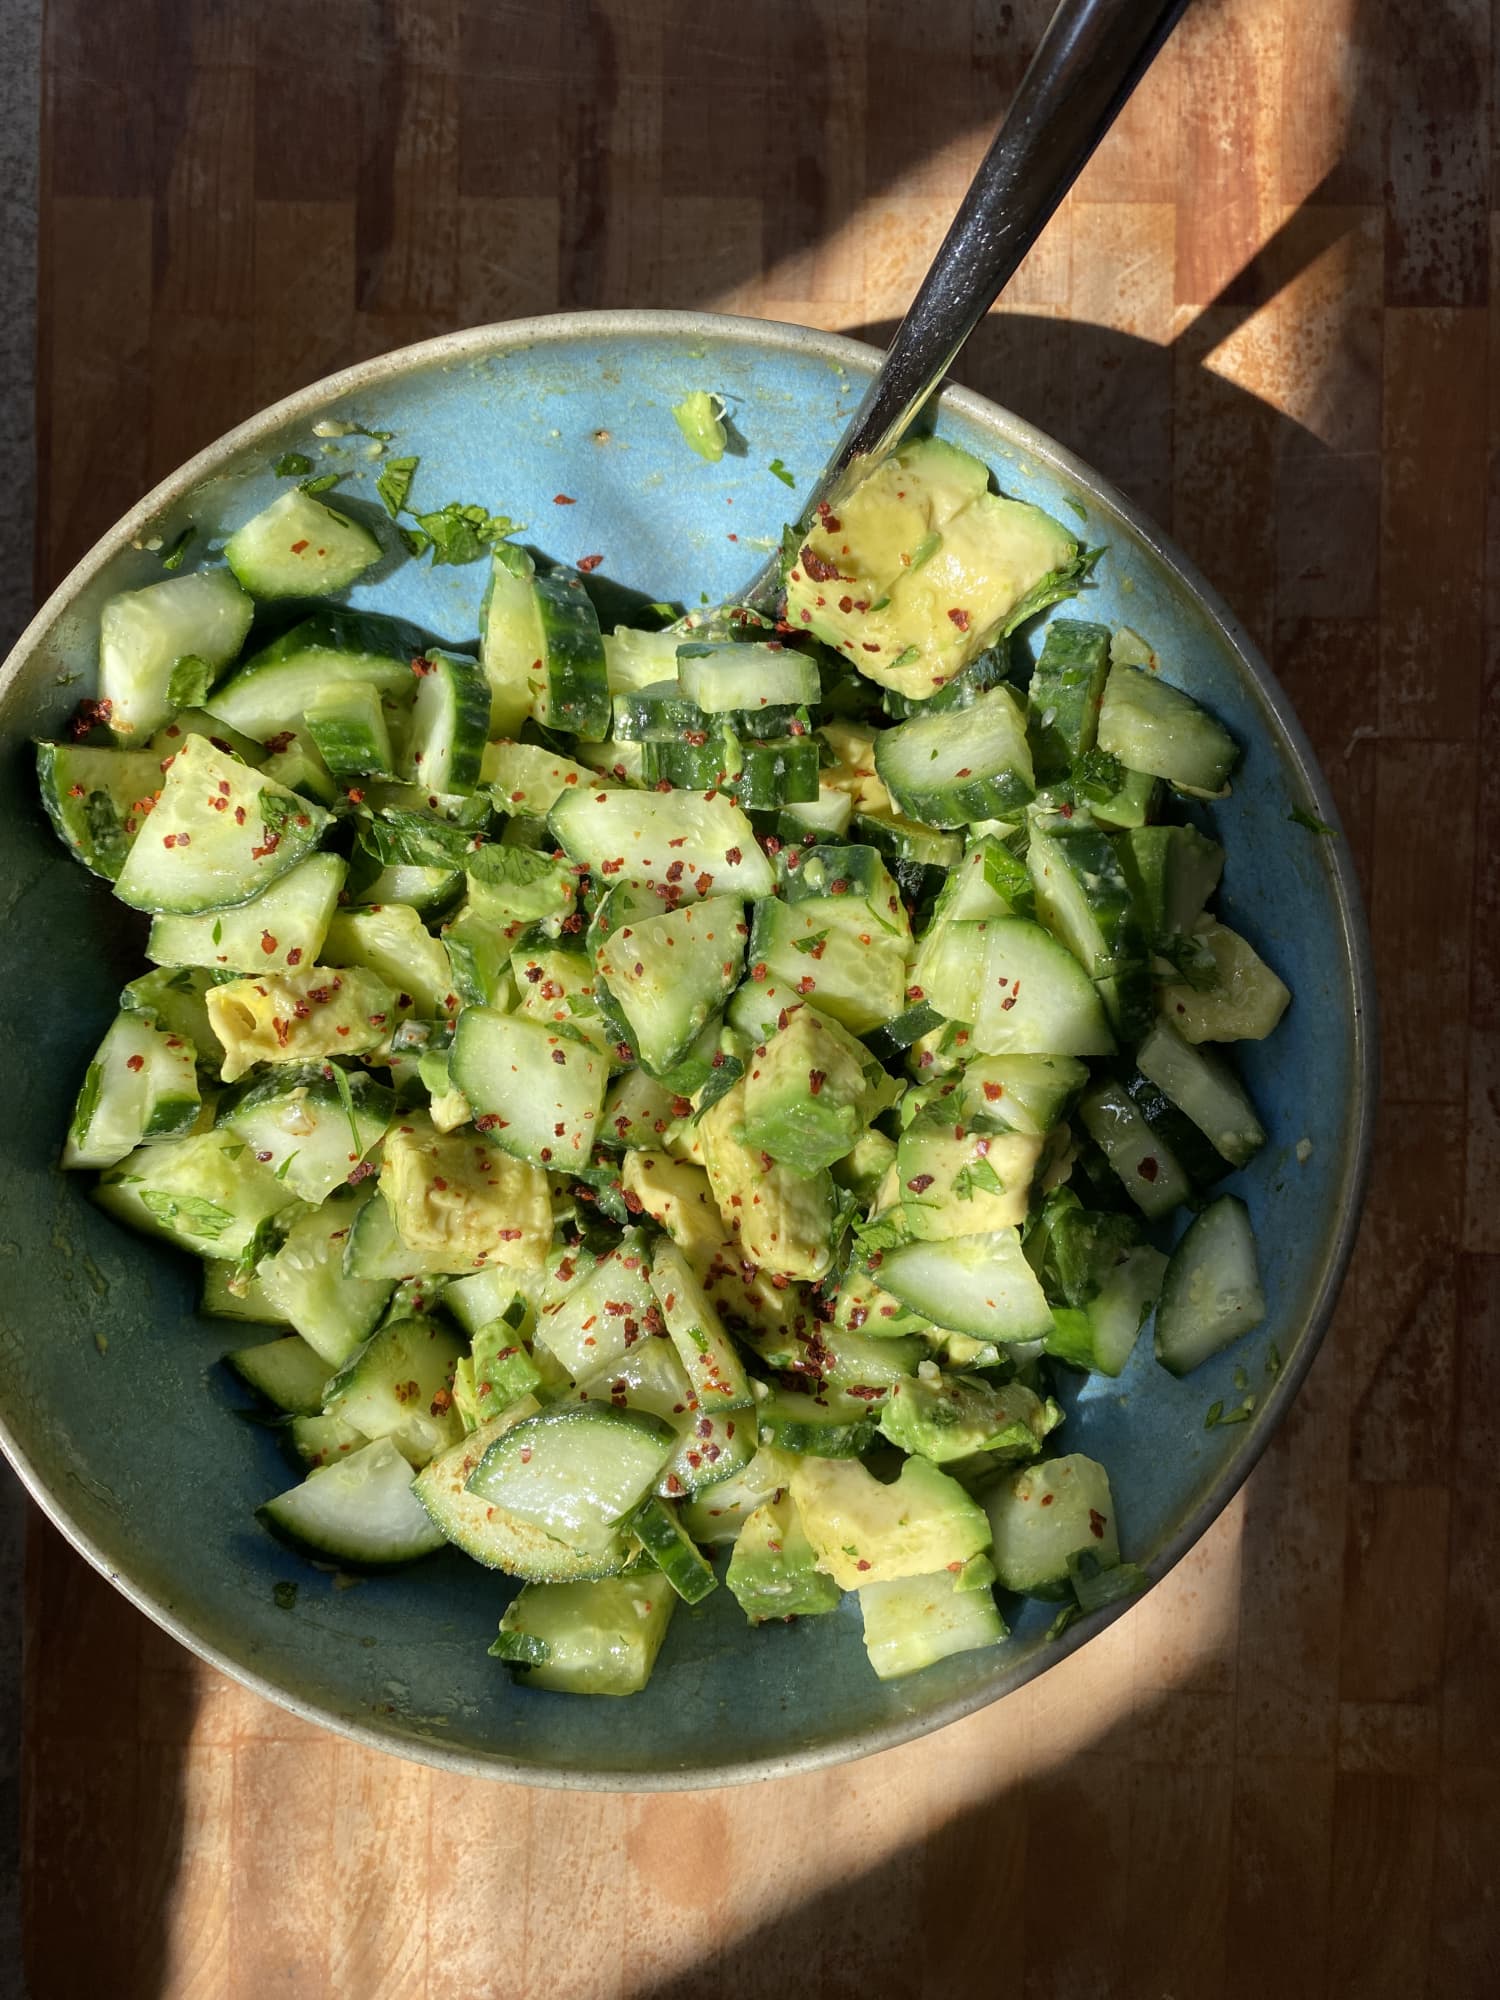 This Cucumber Avocado Salad Is So Deliciously Refreshing, You’ll Want to Make It Every Day